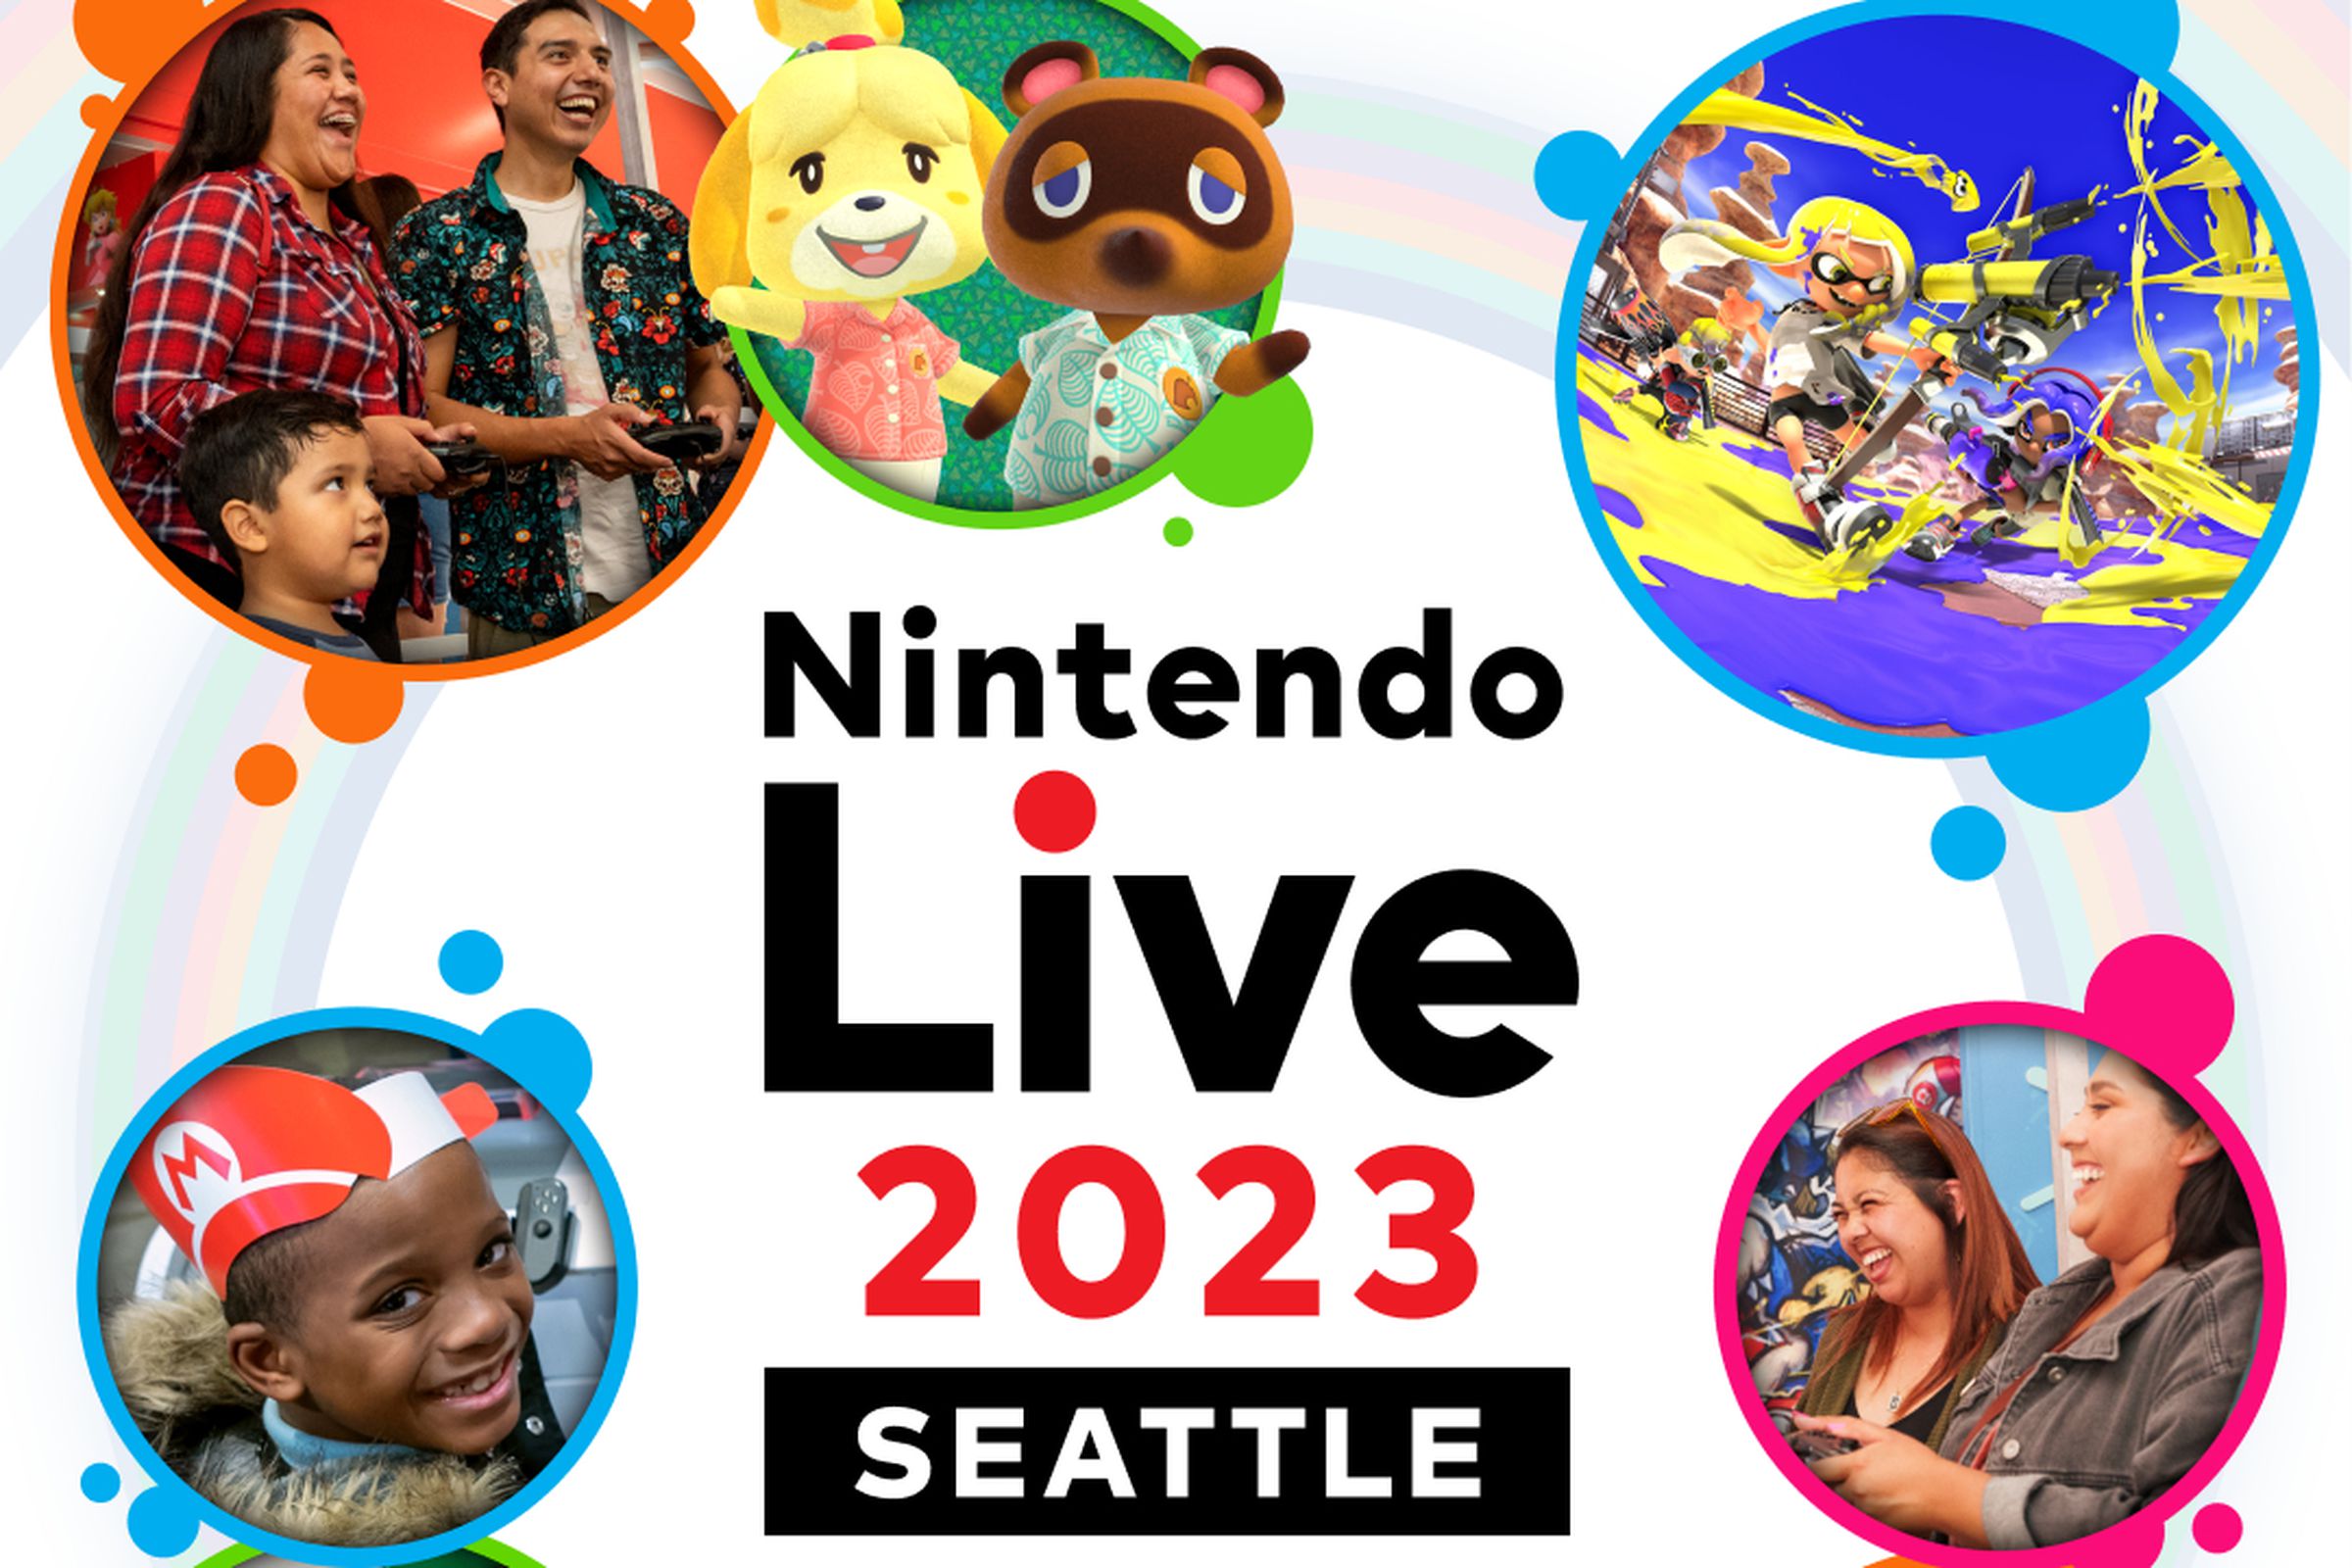 Nintendo Live 2023 promotional image showing images of Mario Kart, Splatoon, and families playing games, with text showing the event location at the Seattle Convention Center and the dates: September 1st through September 4th.